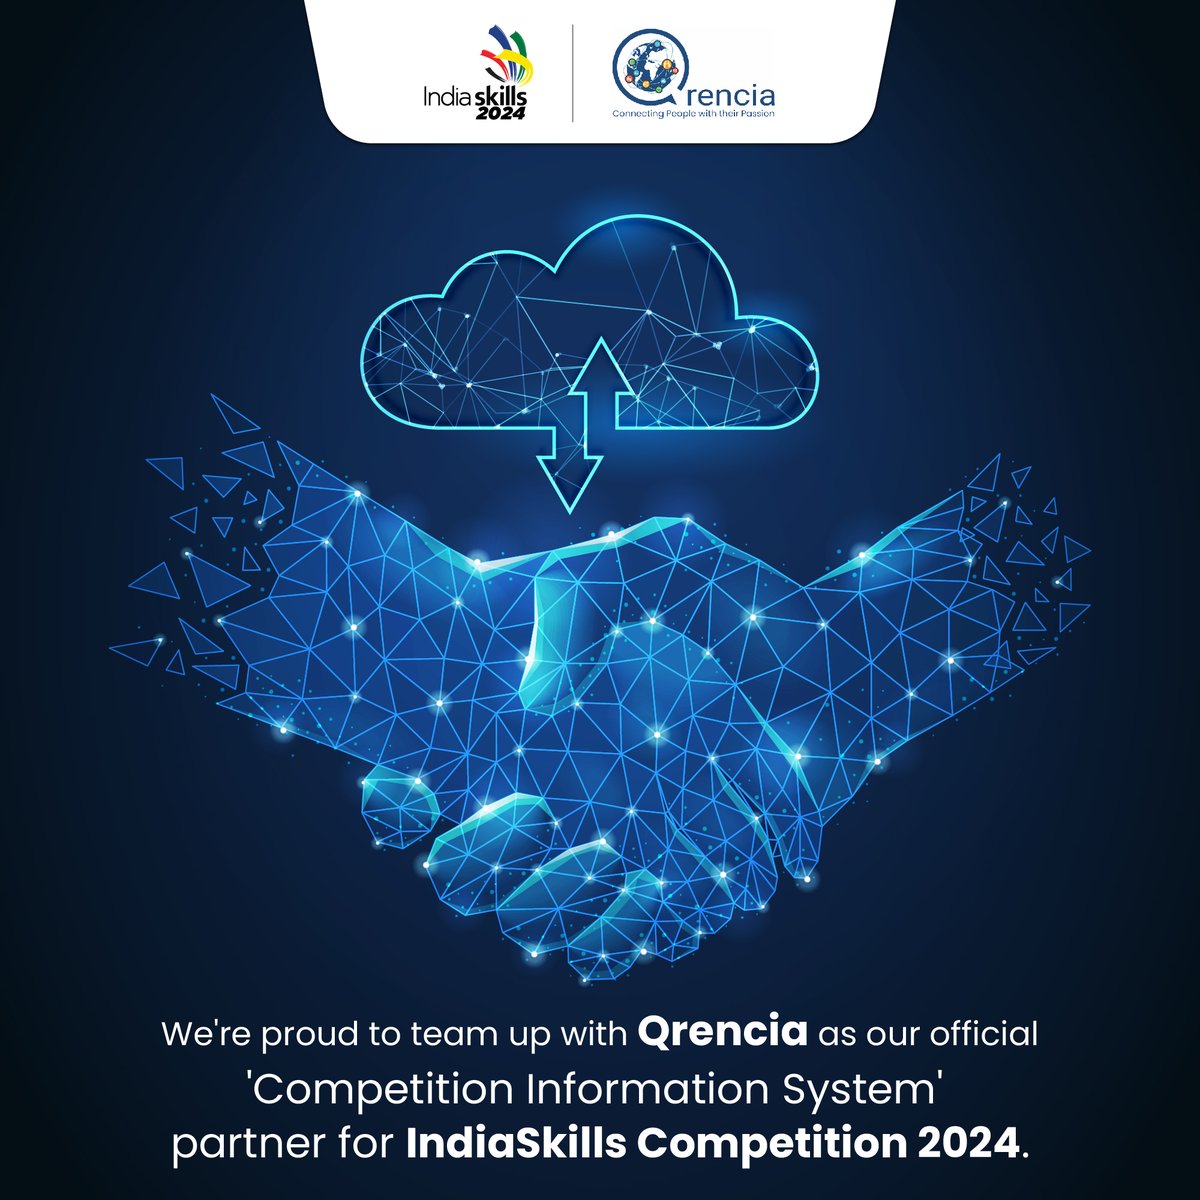 We're thrilled to unveil our collaboration with @QrenciaSkills as the official 'Competition Information System' partner for IndiaSkills Competition 2024! We embark on this journey together, transforming how competitions are managed #IndiaSkills2024 #Qrencia #Innovation